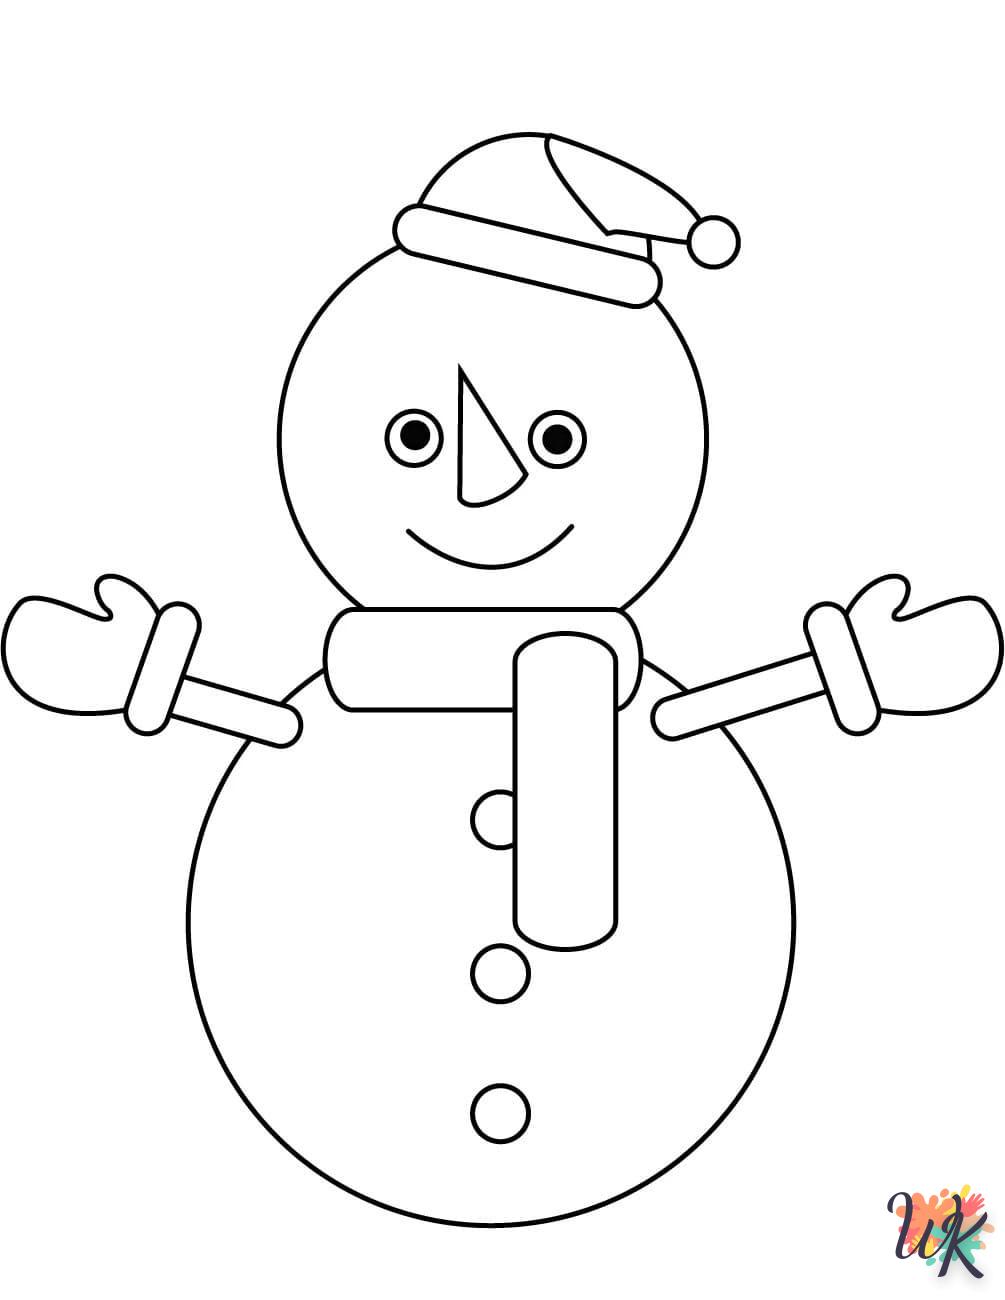 Snowman coloring free online